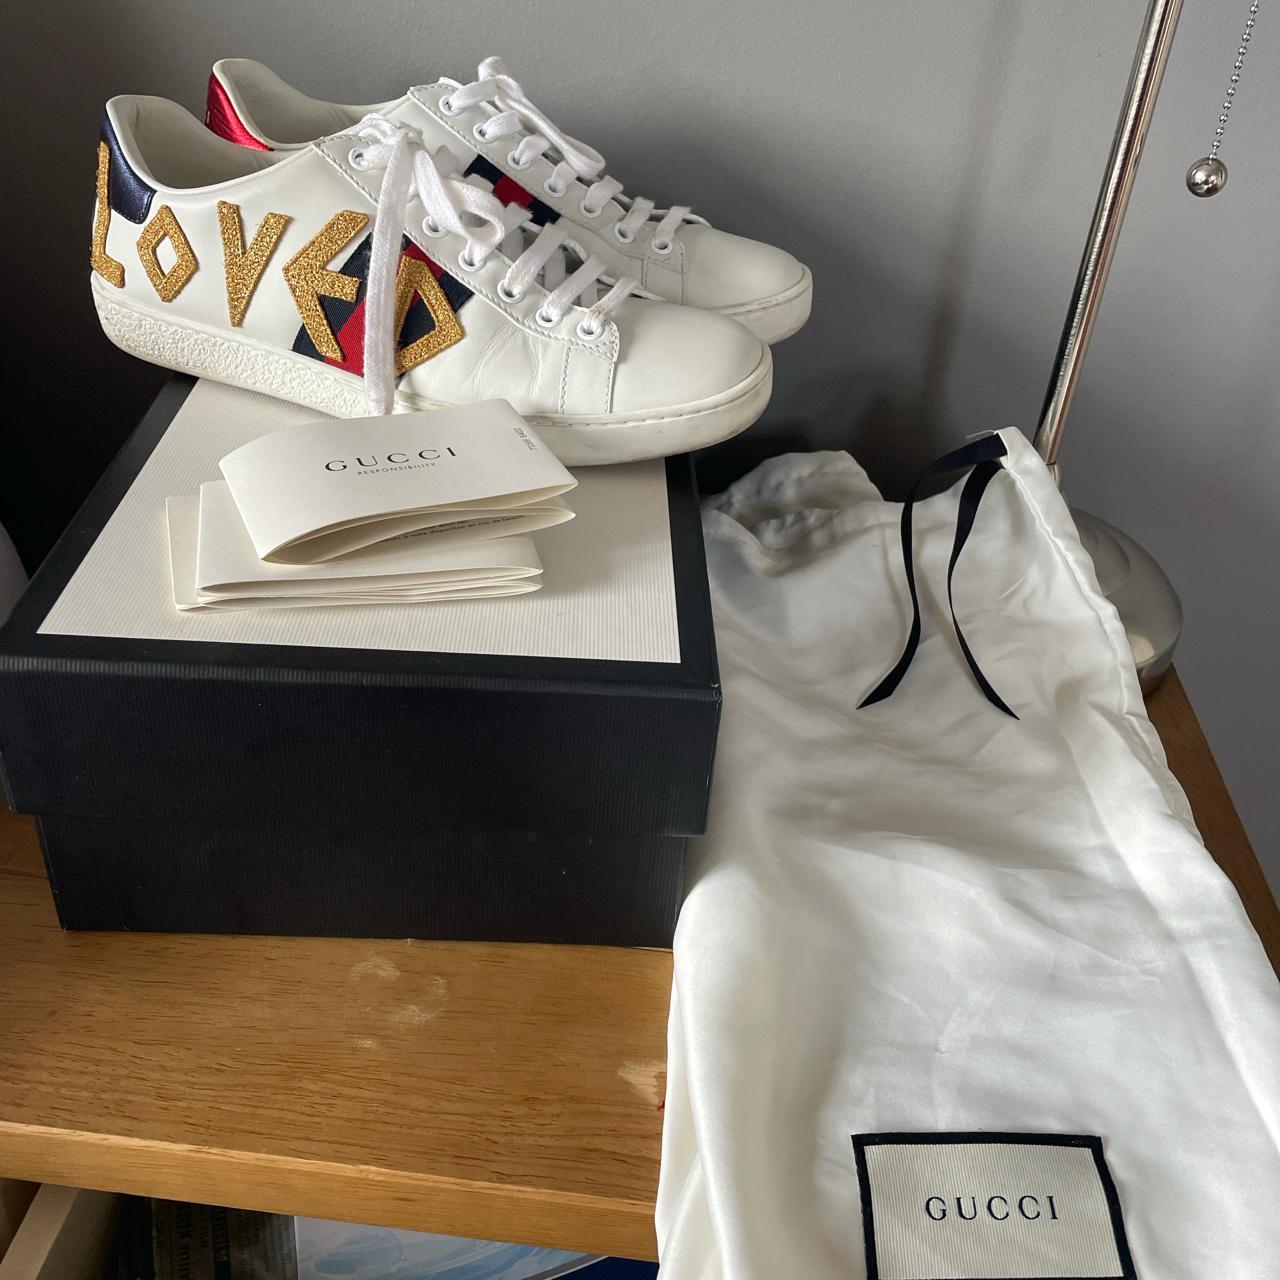 Product Image 1 - Authentic Gucci trainers. Work a